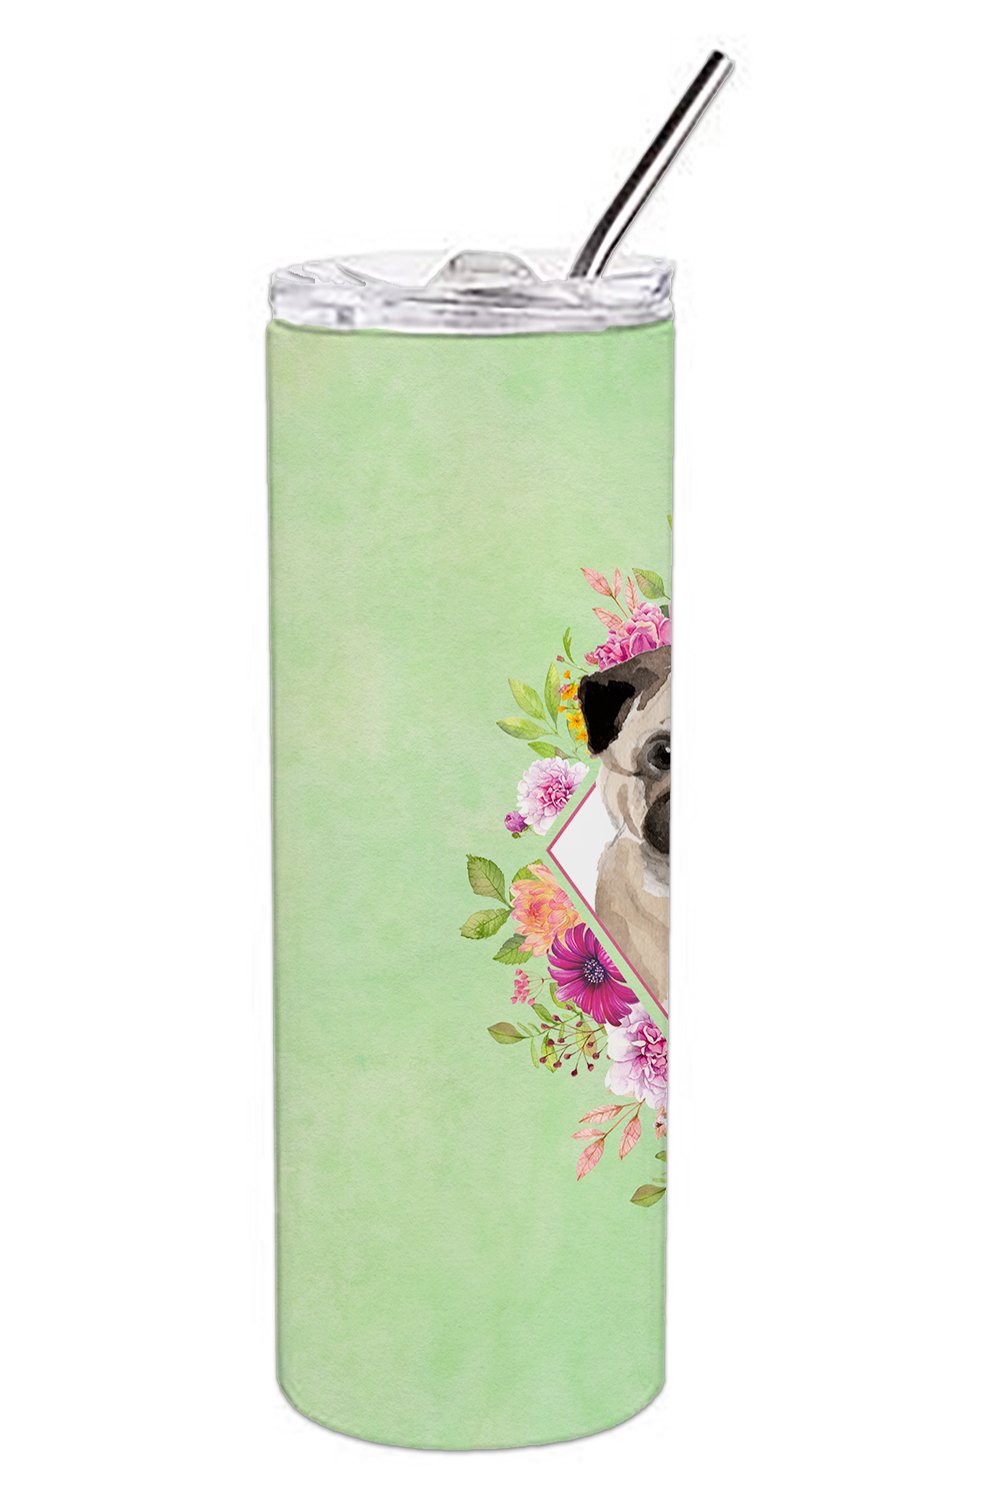 Fawn Pug Green Flowers Double Walled Stainless Steel 20 oz Skinny Tumbler CK4378TBL20 by Caroline's Treasures